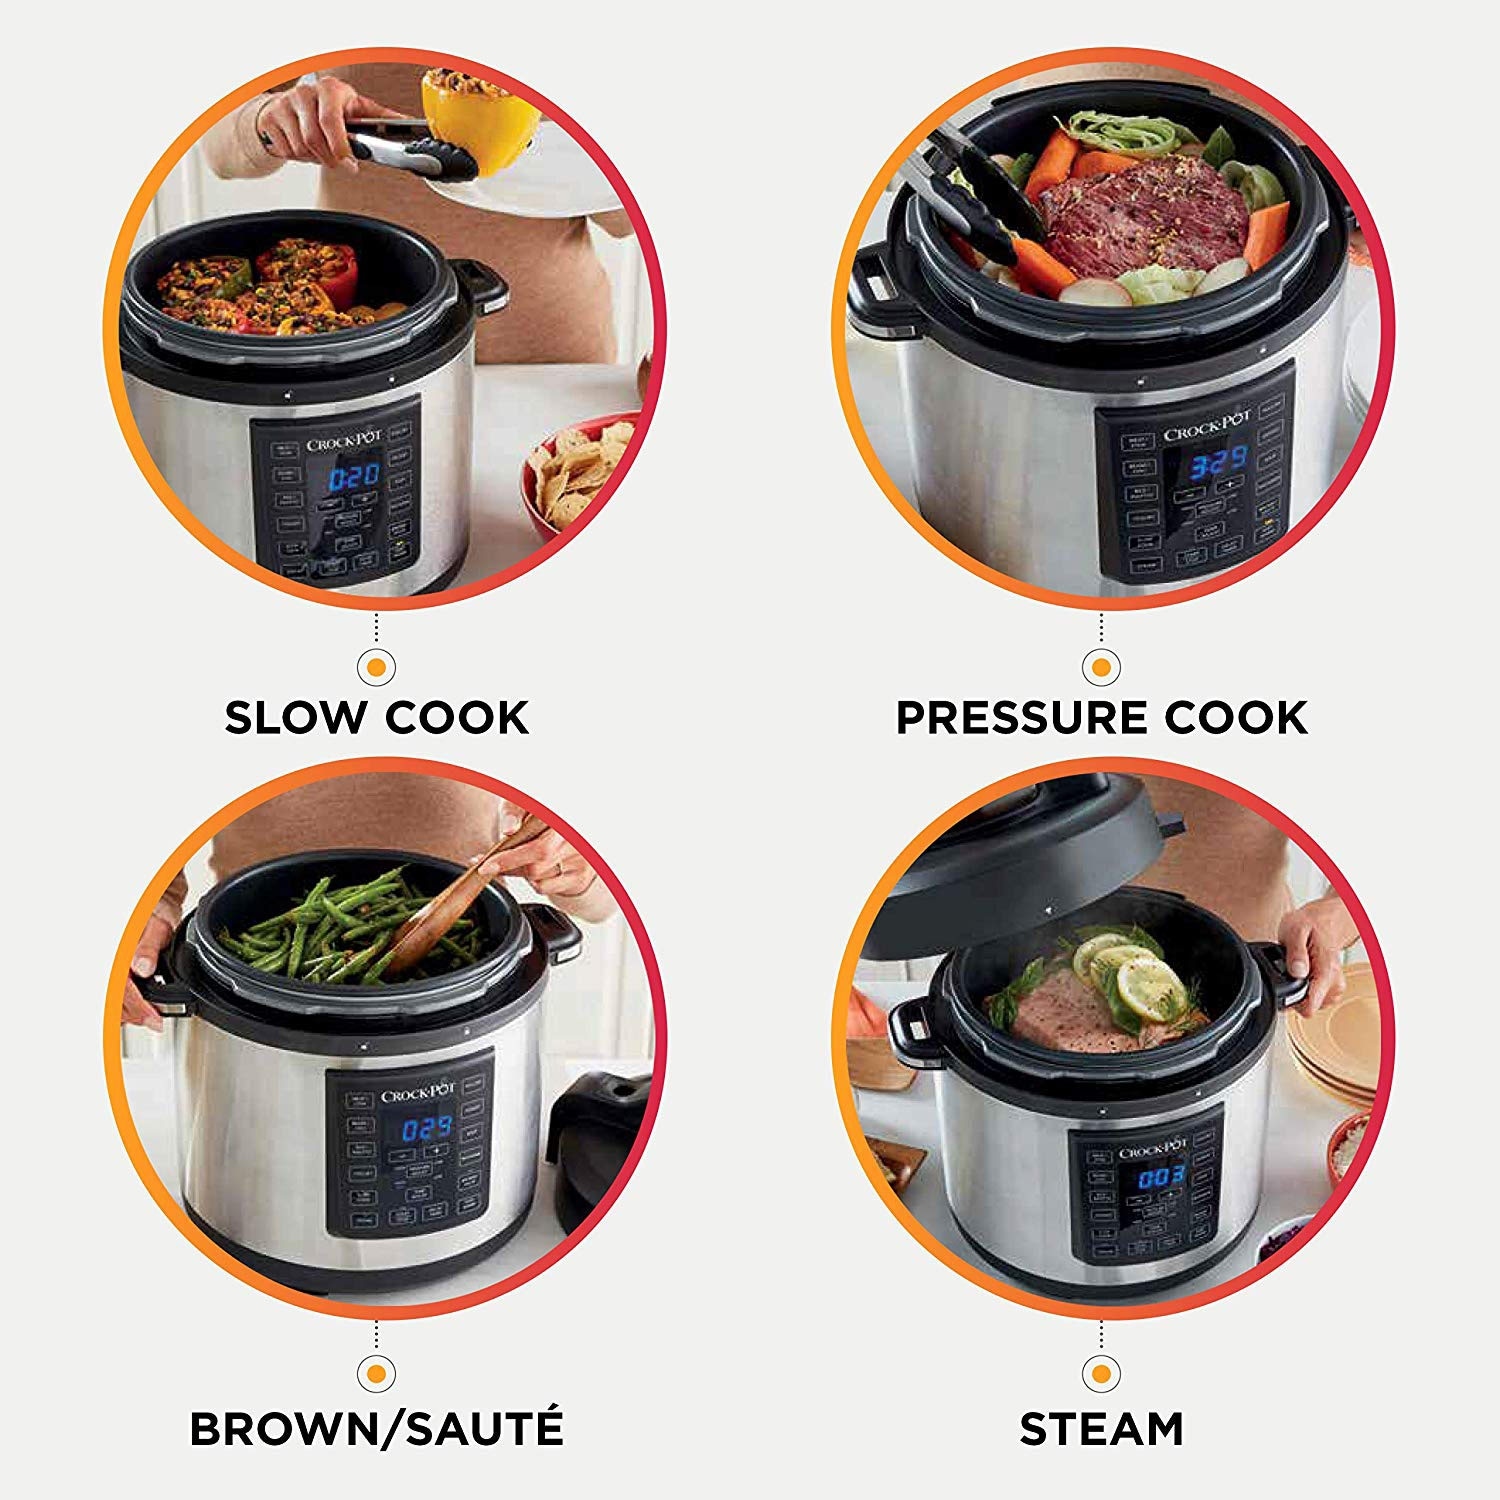 https://ak1.ostkcdn.com/images/products/is/images/direct/cf705a976f2e4e007519b851e98f347b47a299a4/Crock-Pot-8-In-1-Multi-Use-Express-Cooker%2C-Silver-Black%2C-6-Quarts.jpg